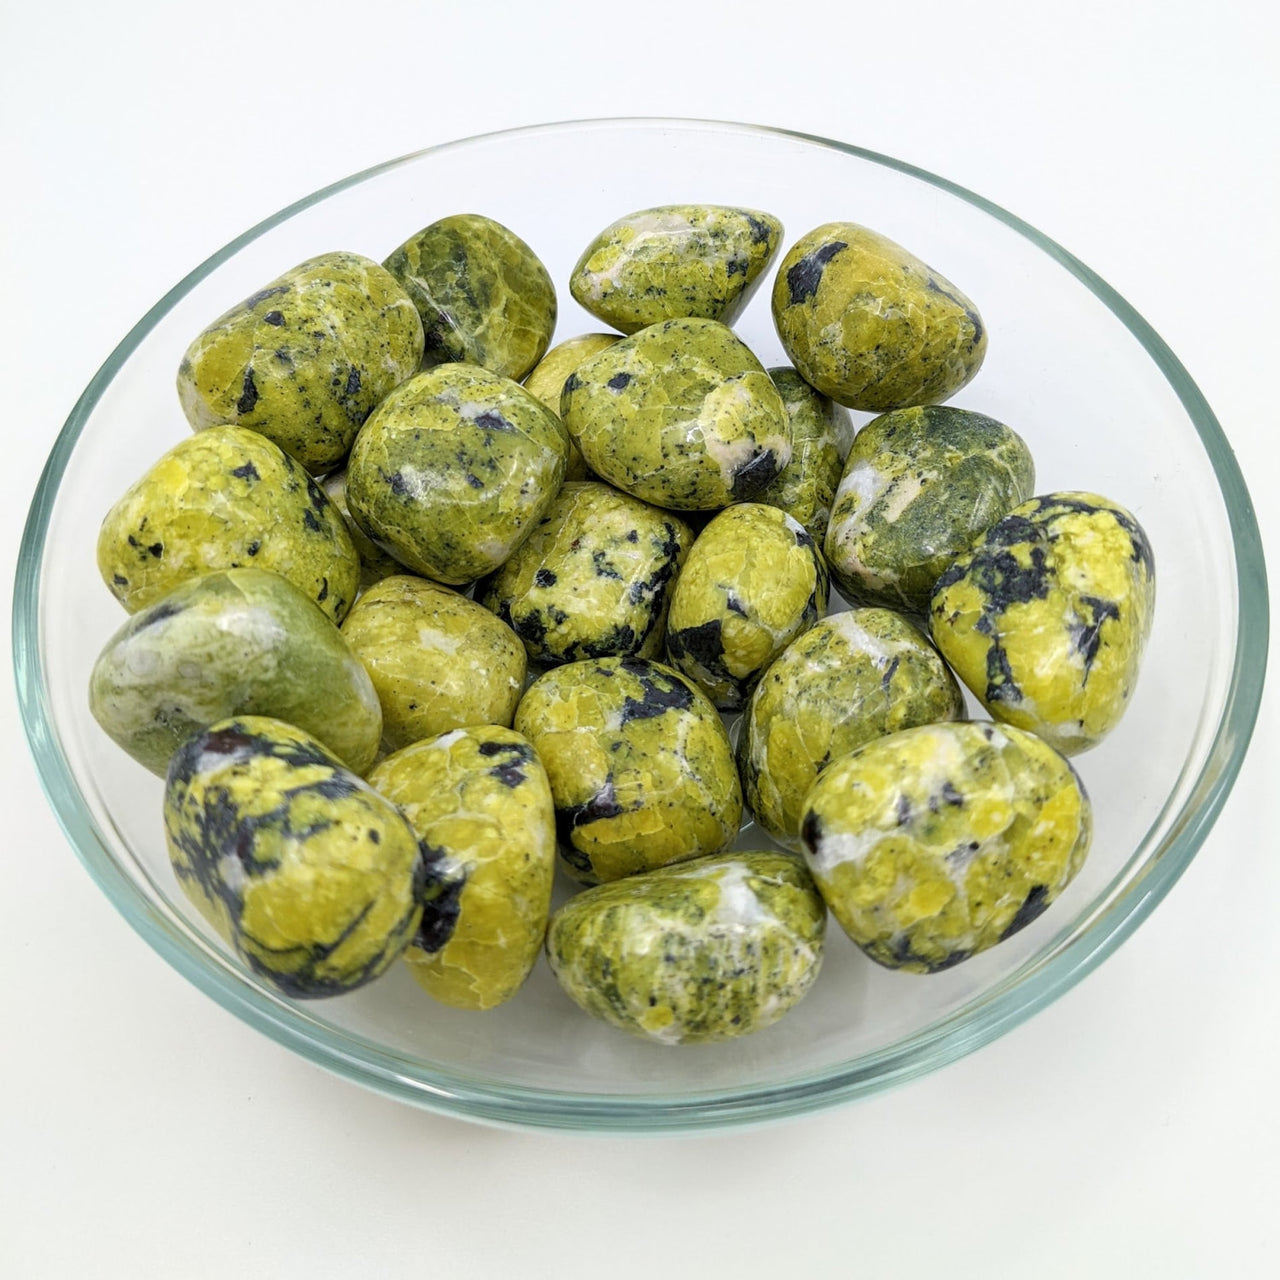 A bowl of green and blue tumbled stones from 1 Lizardite 1’ Serpentine Tumble #SK9163